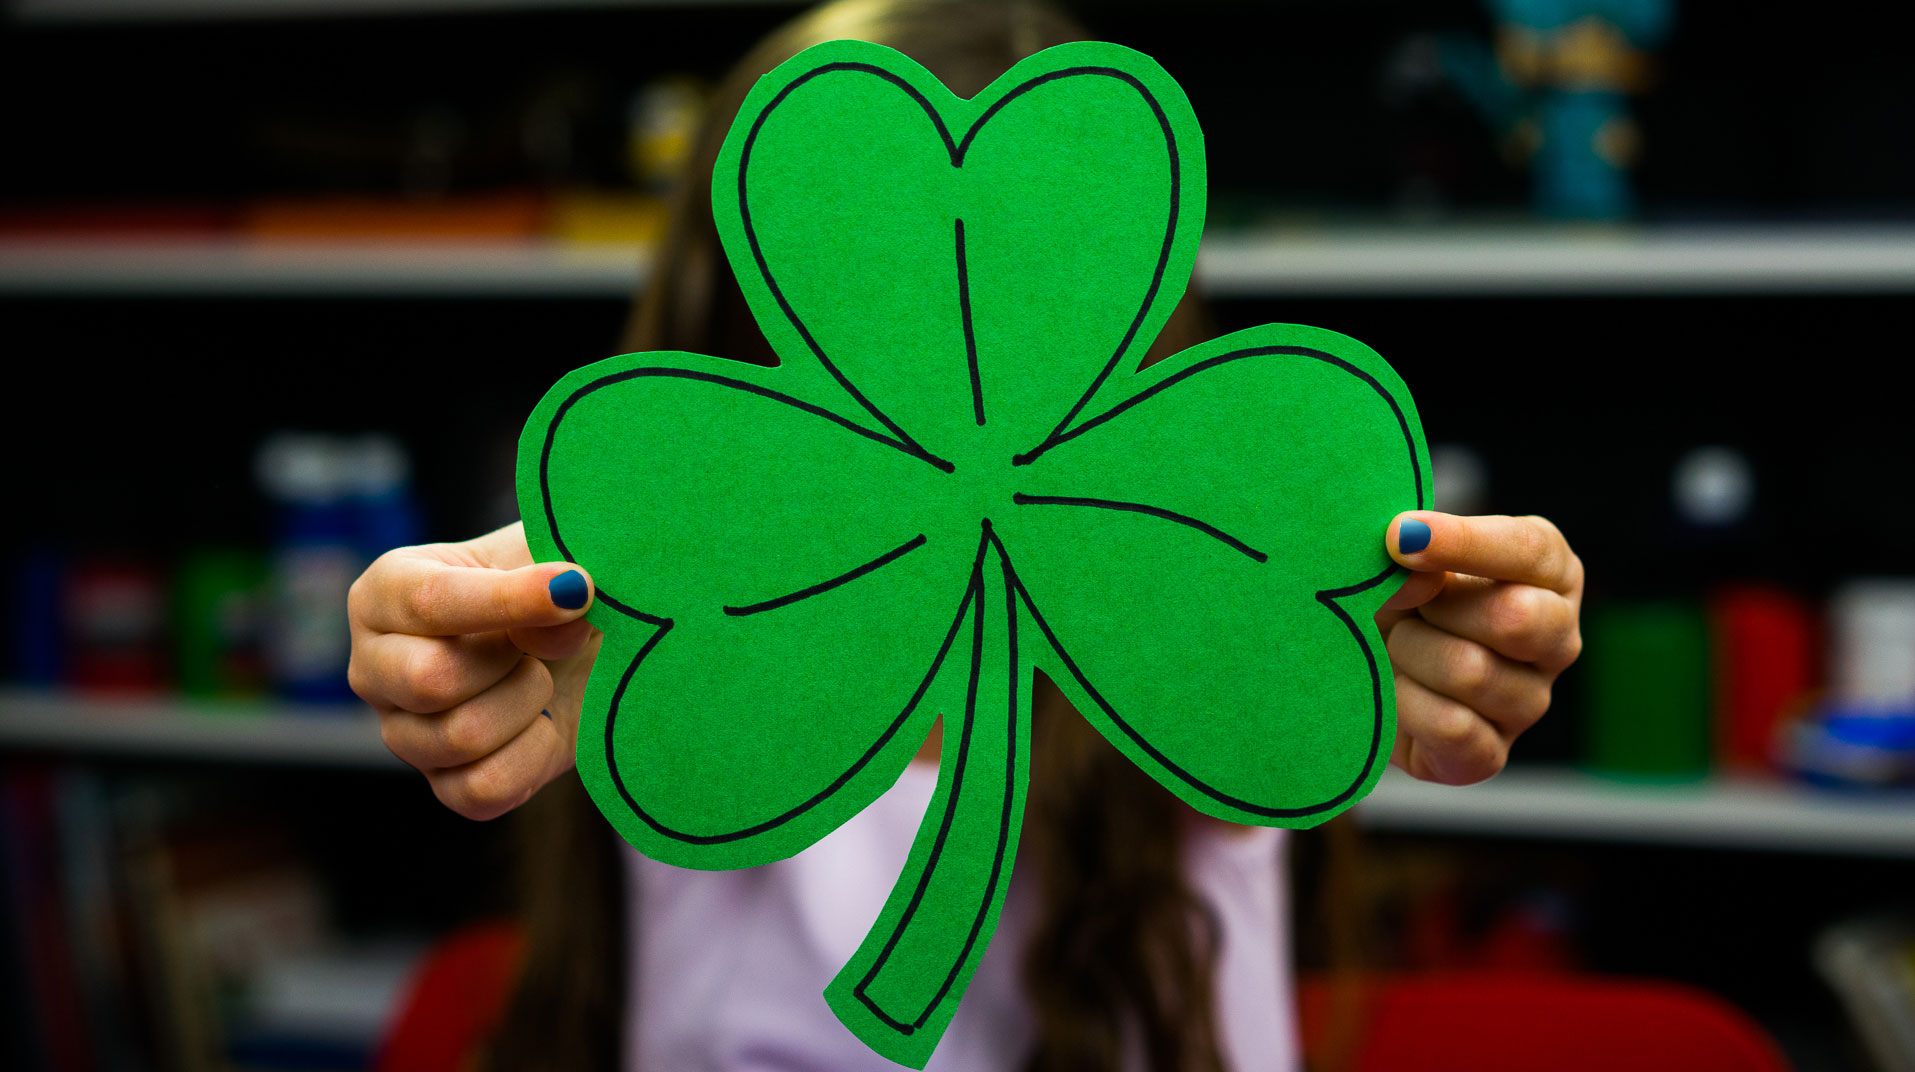 How To Draw A Shamrock - Art For Kids Hub